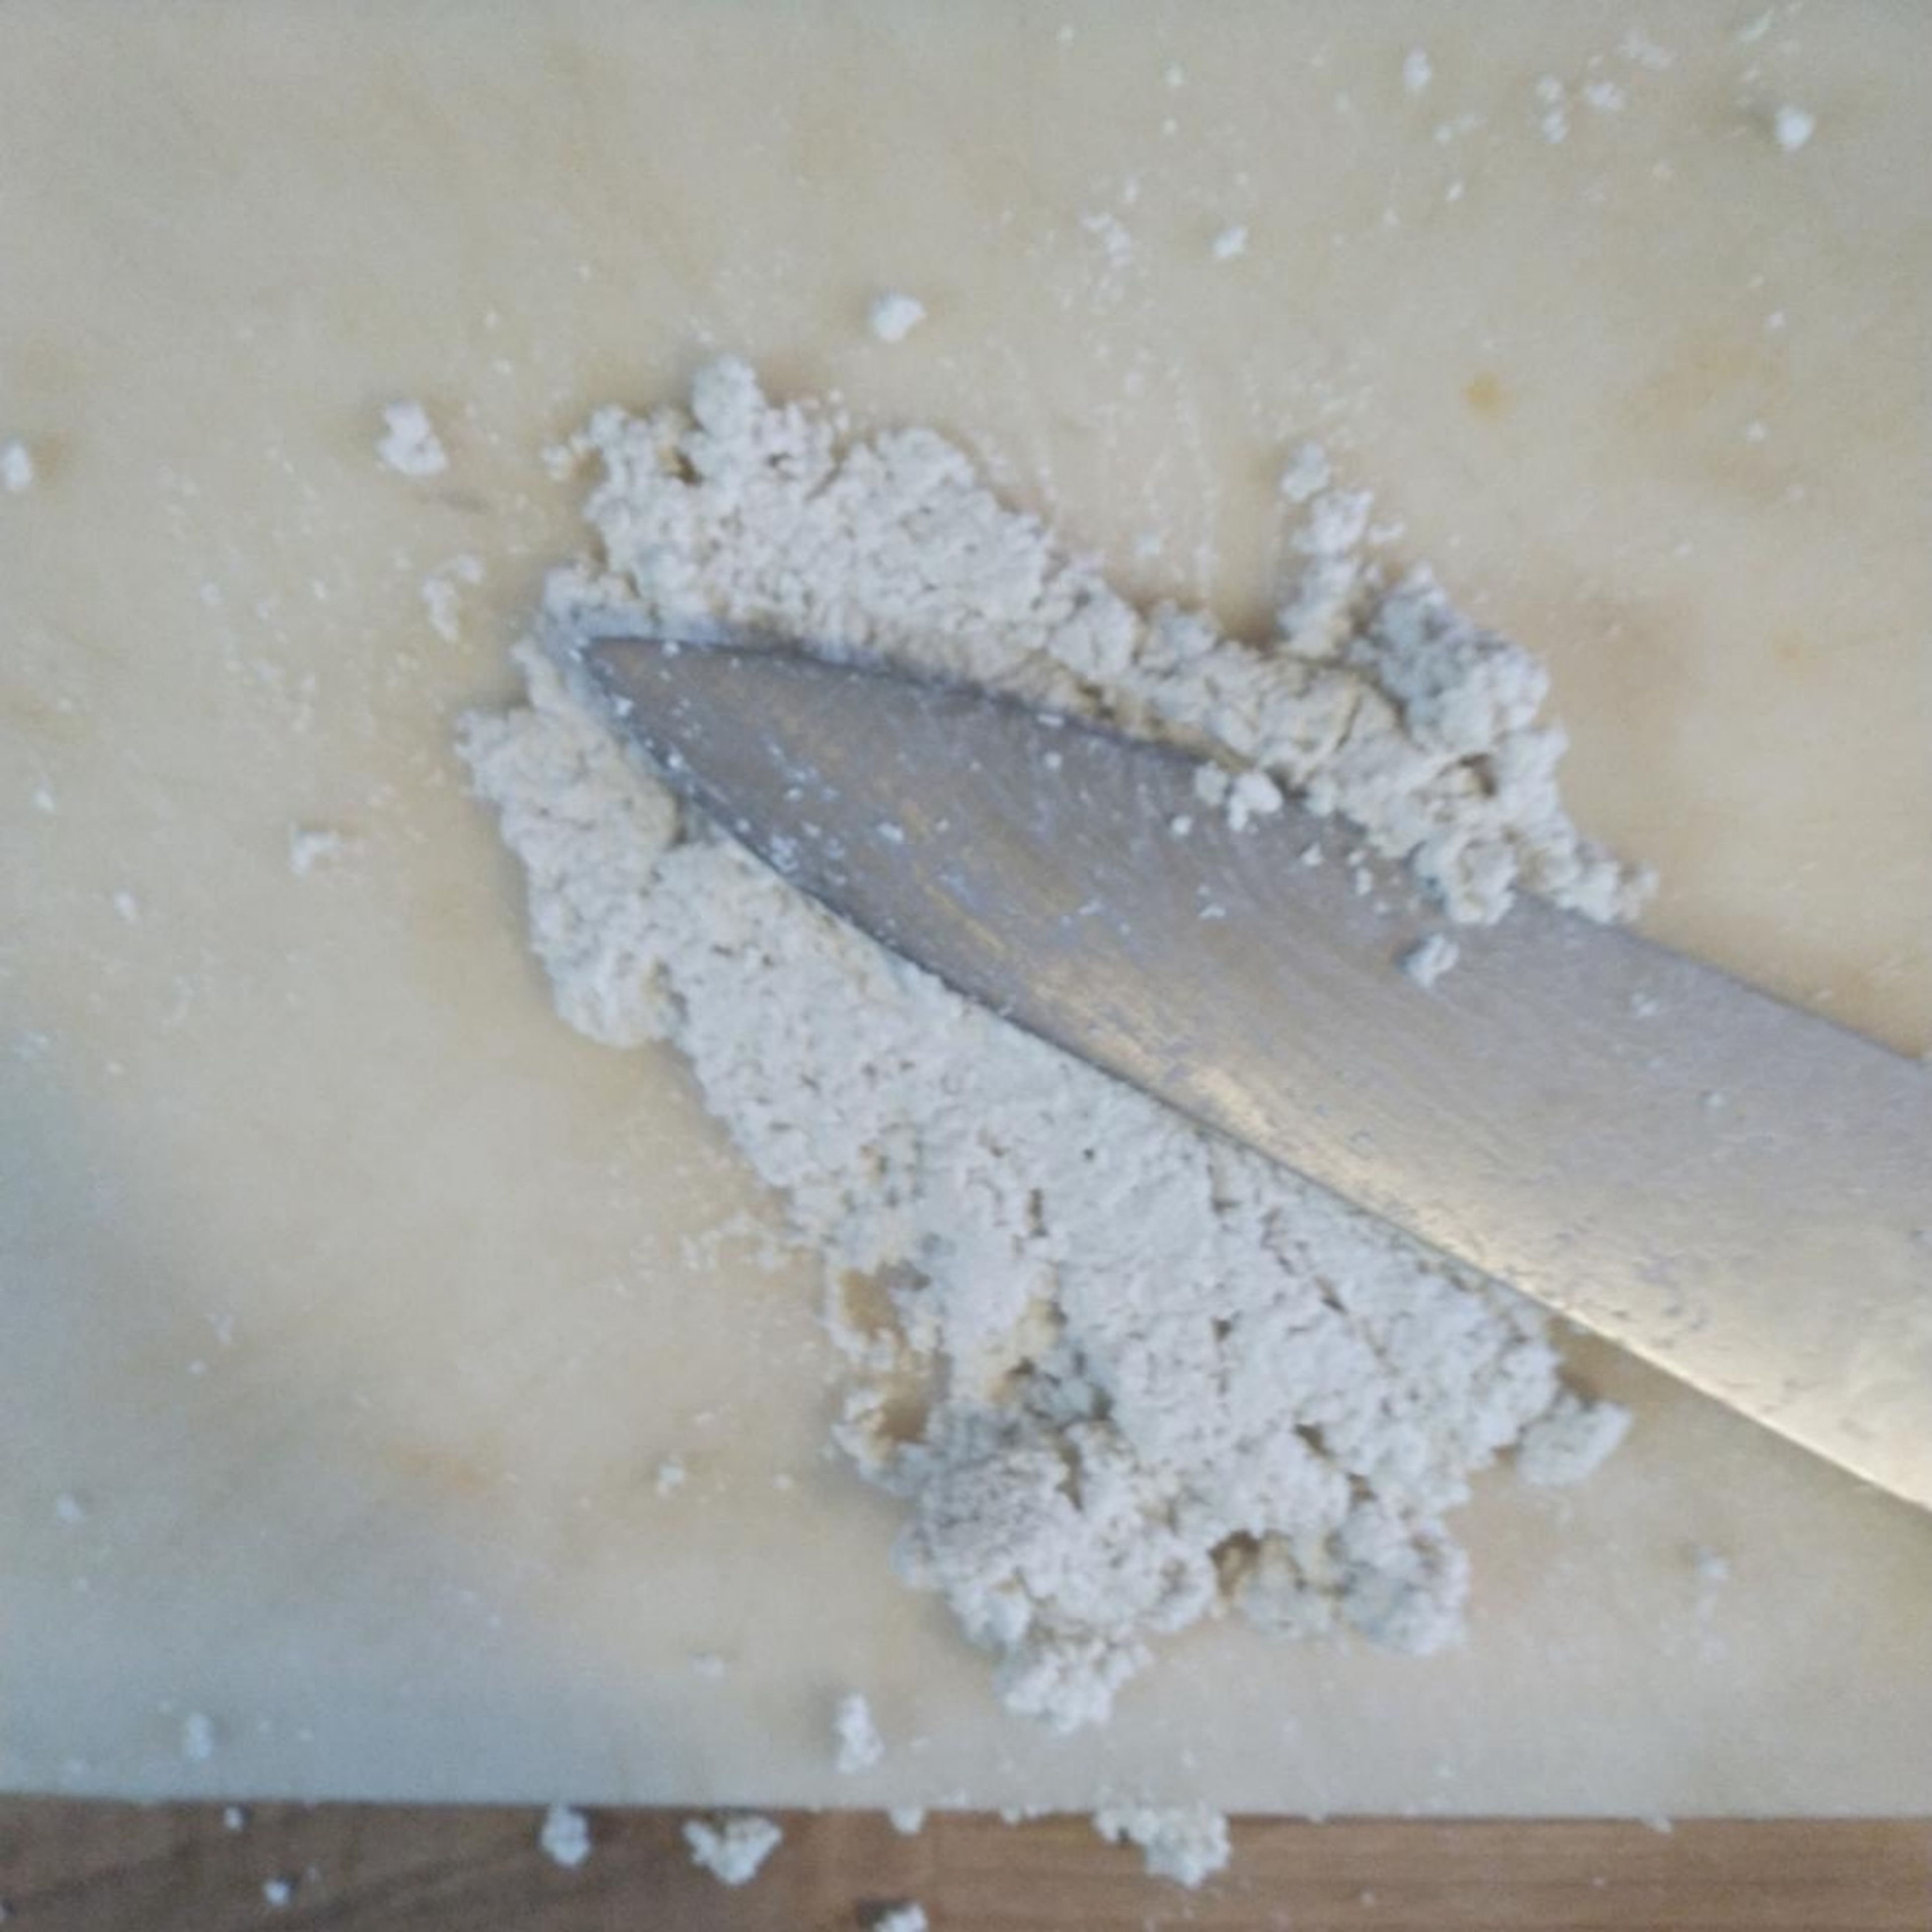 Drain the tofu. Finely chop the tofu until it is paste like, then 'mash' with the side of the knife to make a tofu paste. Add the barberries, hoisin sauce, some freshly grated nutmeg and chilli flakes.